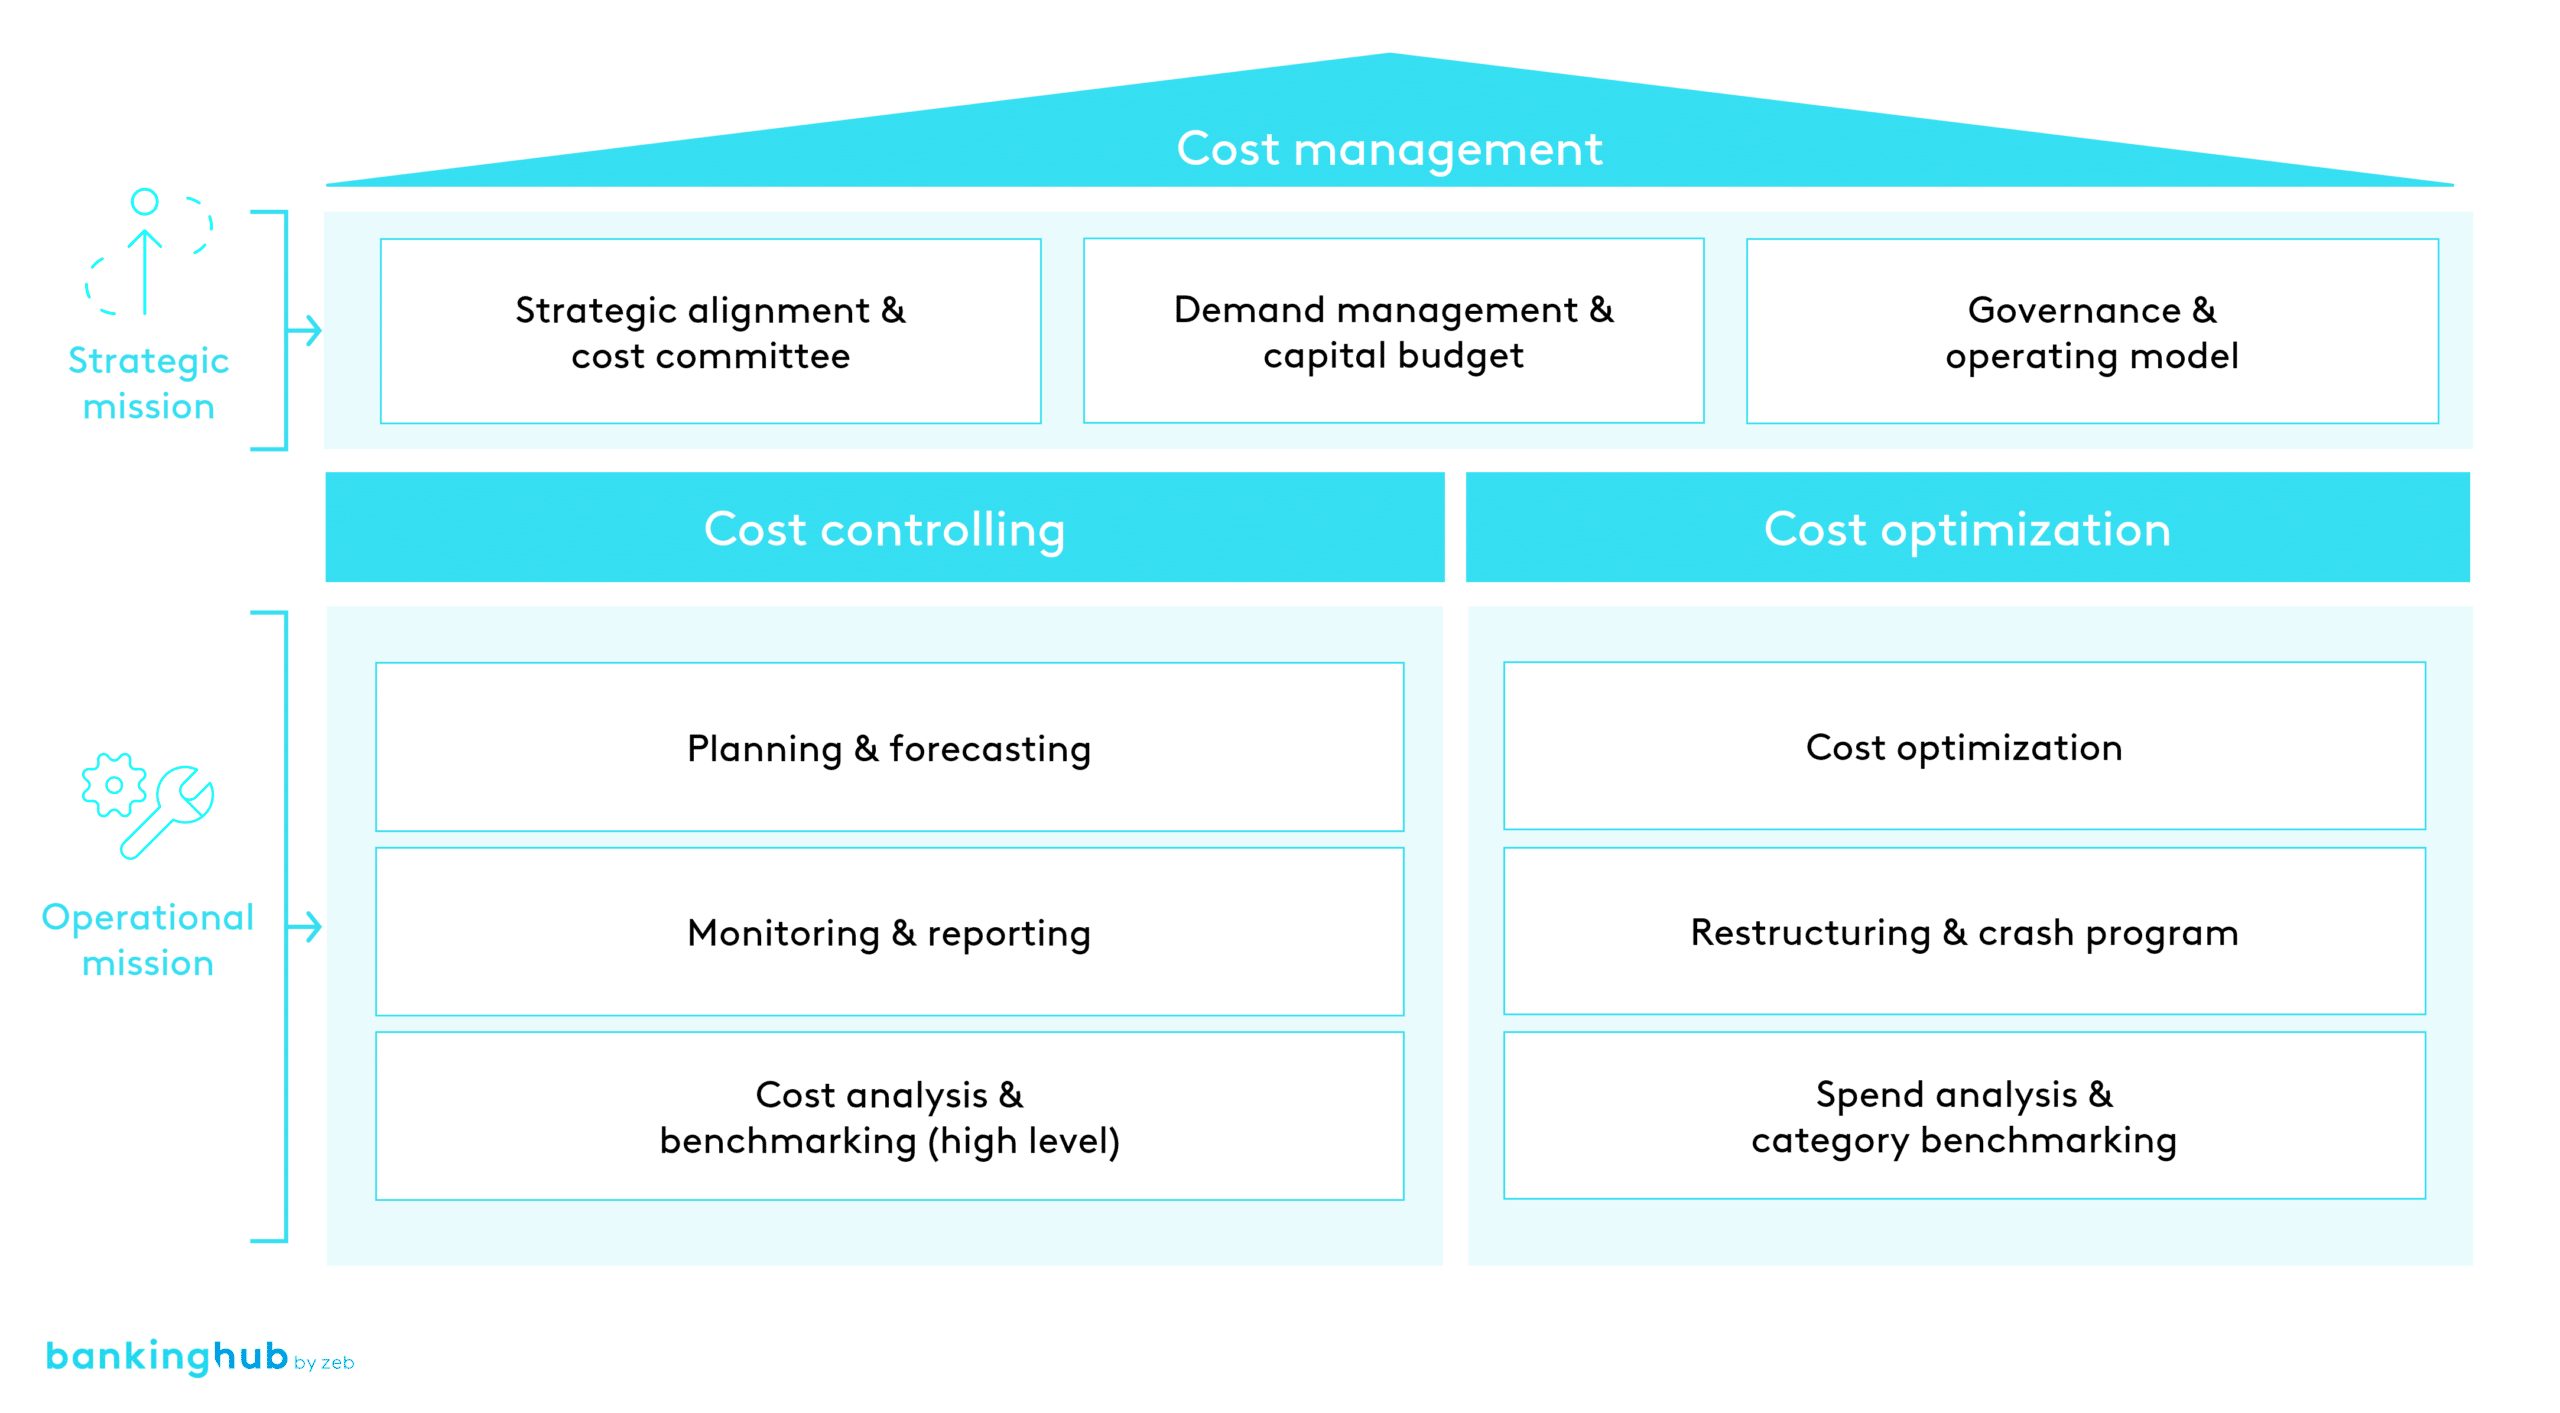 Strategic and operational profile as a possible setup of the cost management function